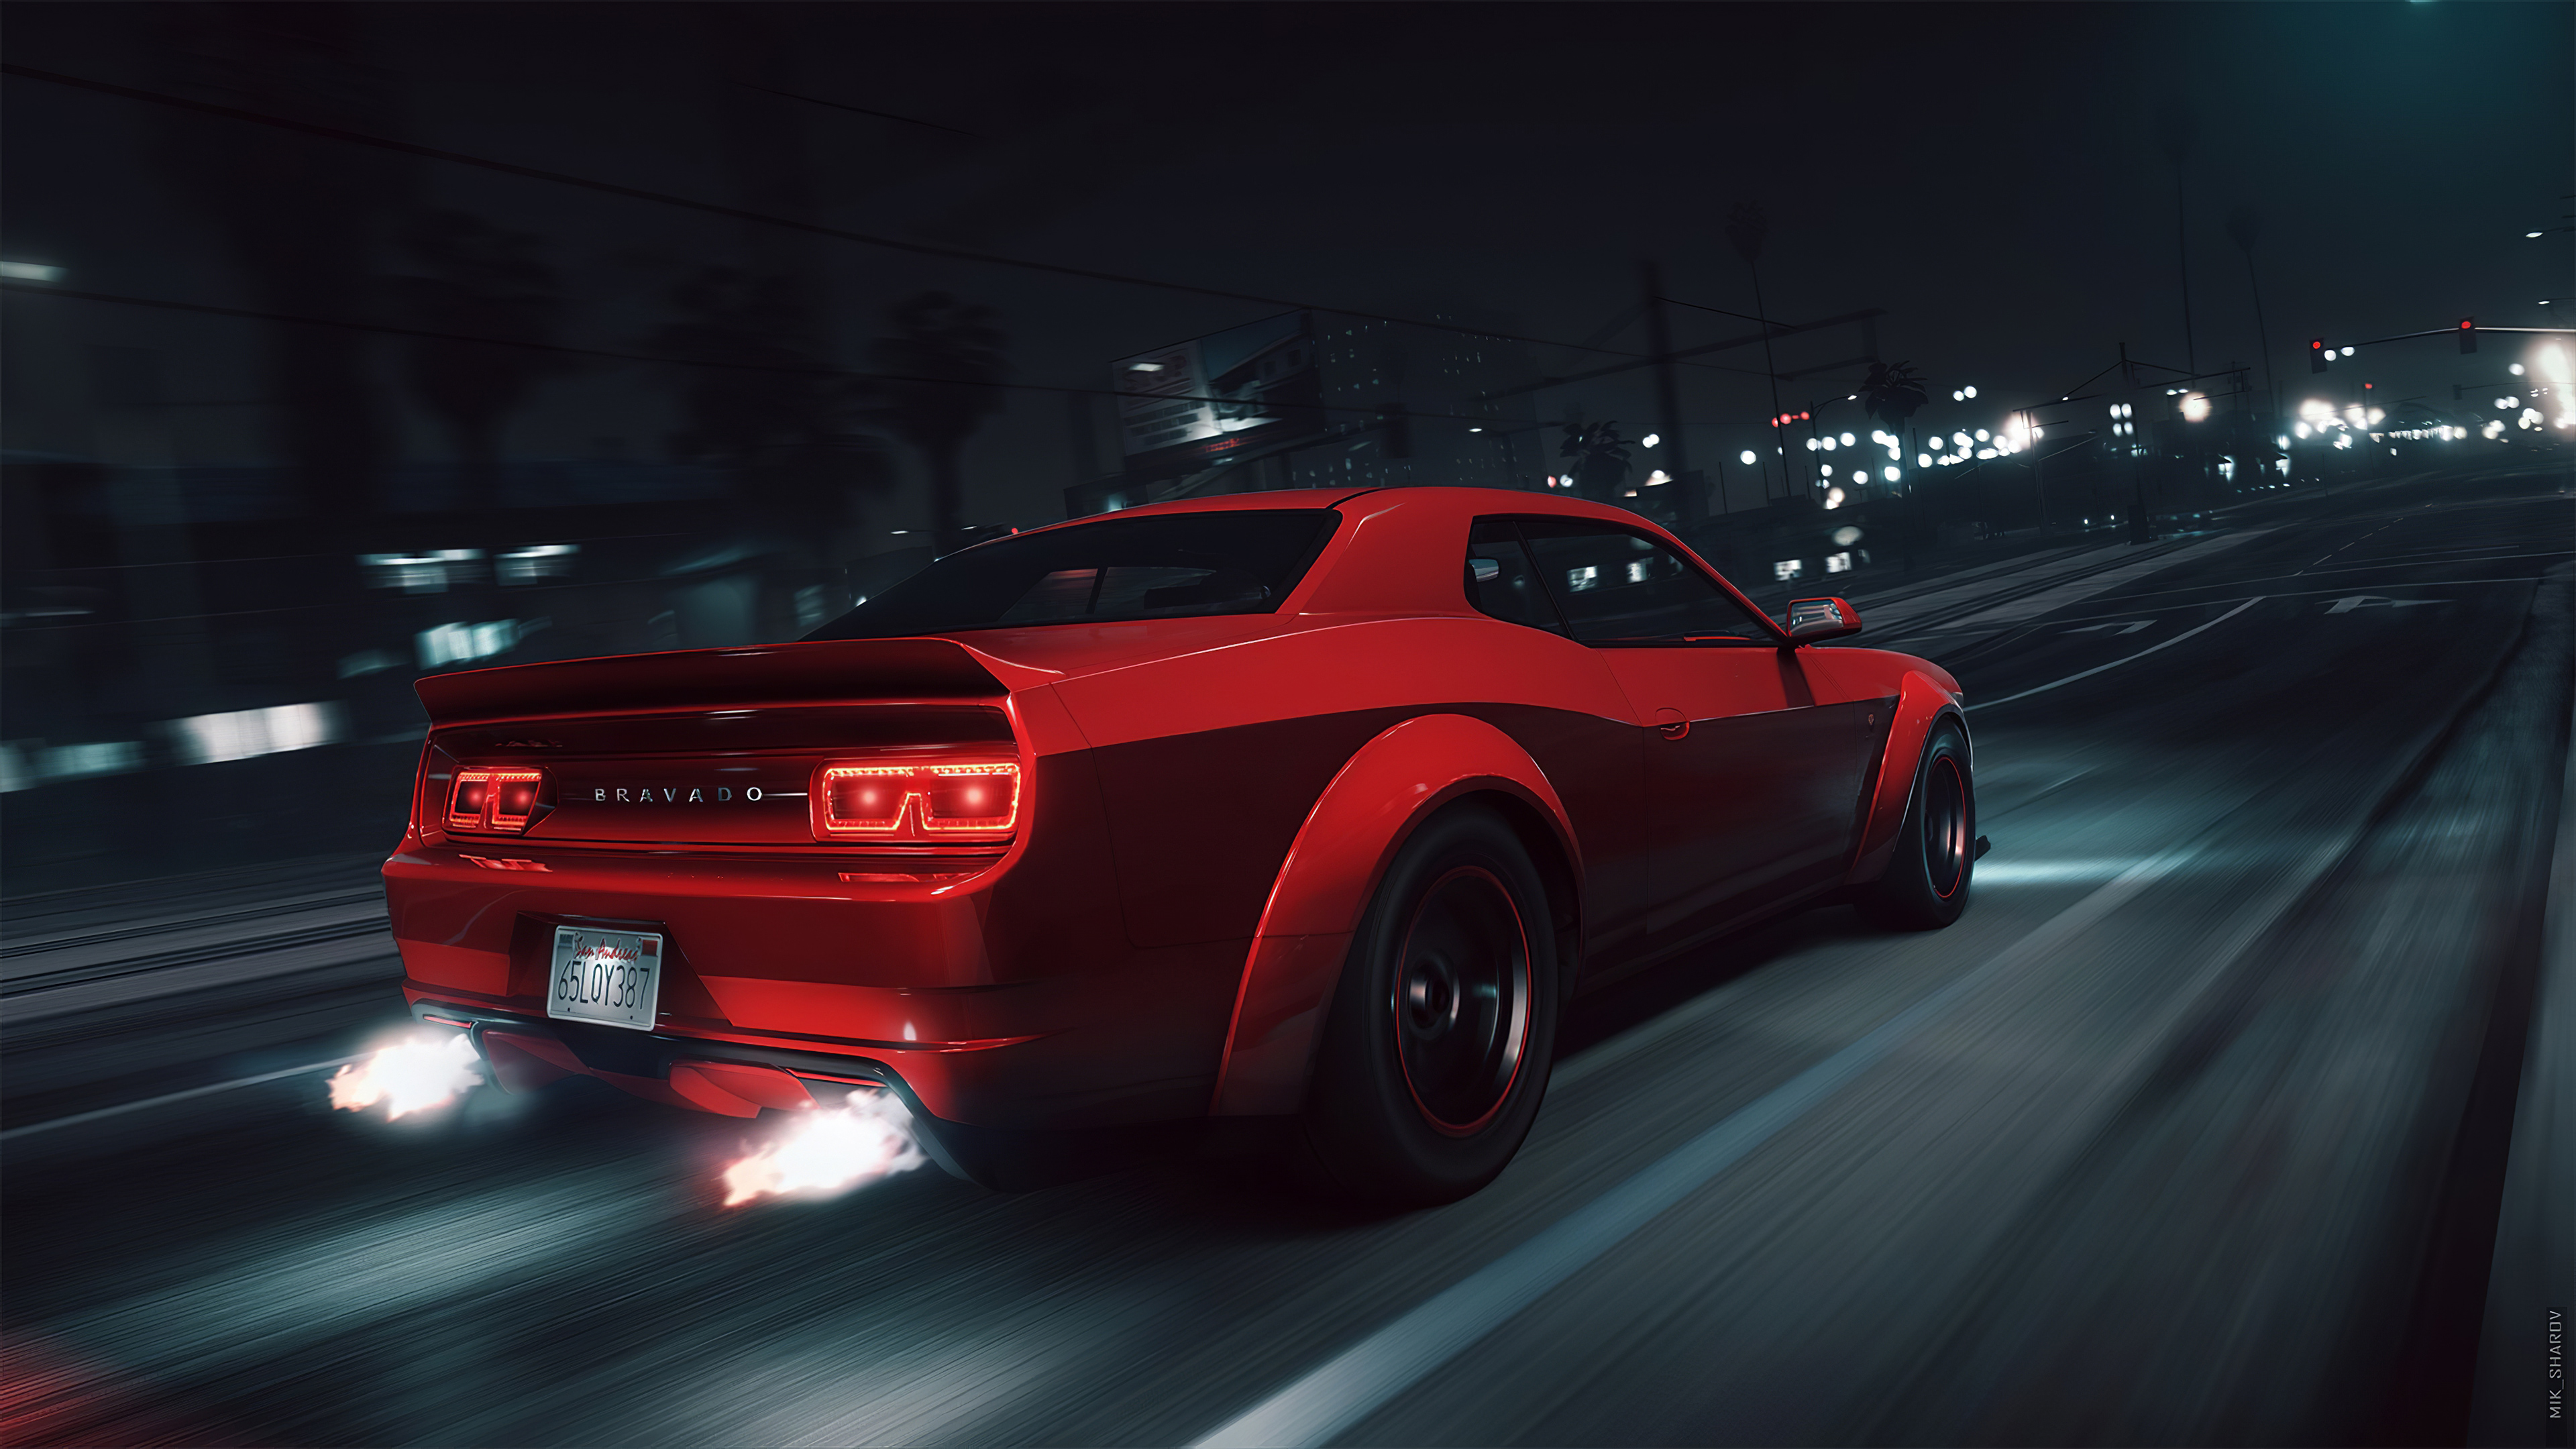 A rendering of a picture of a red Dodge Challenger at night